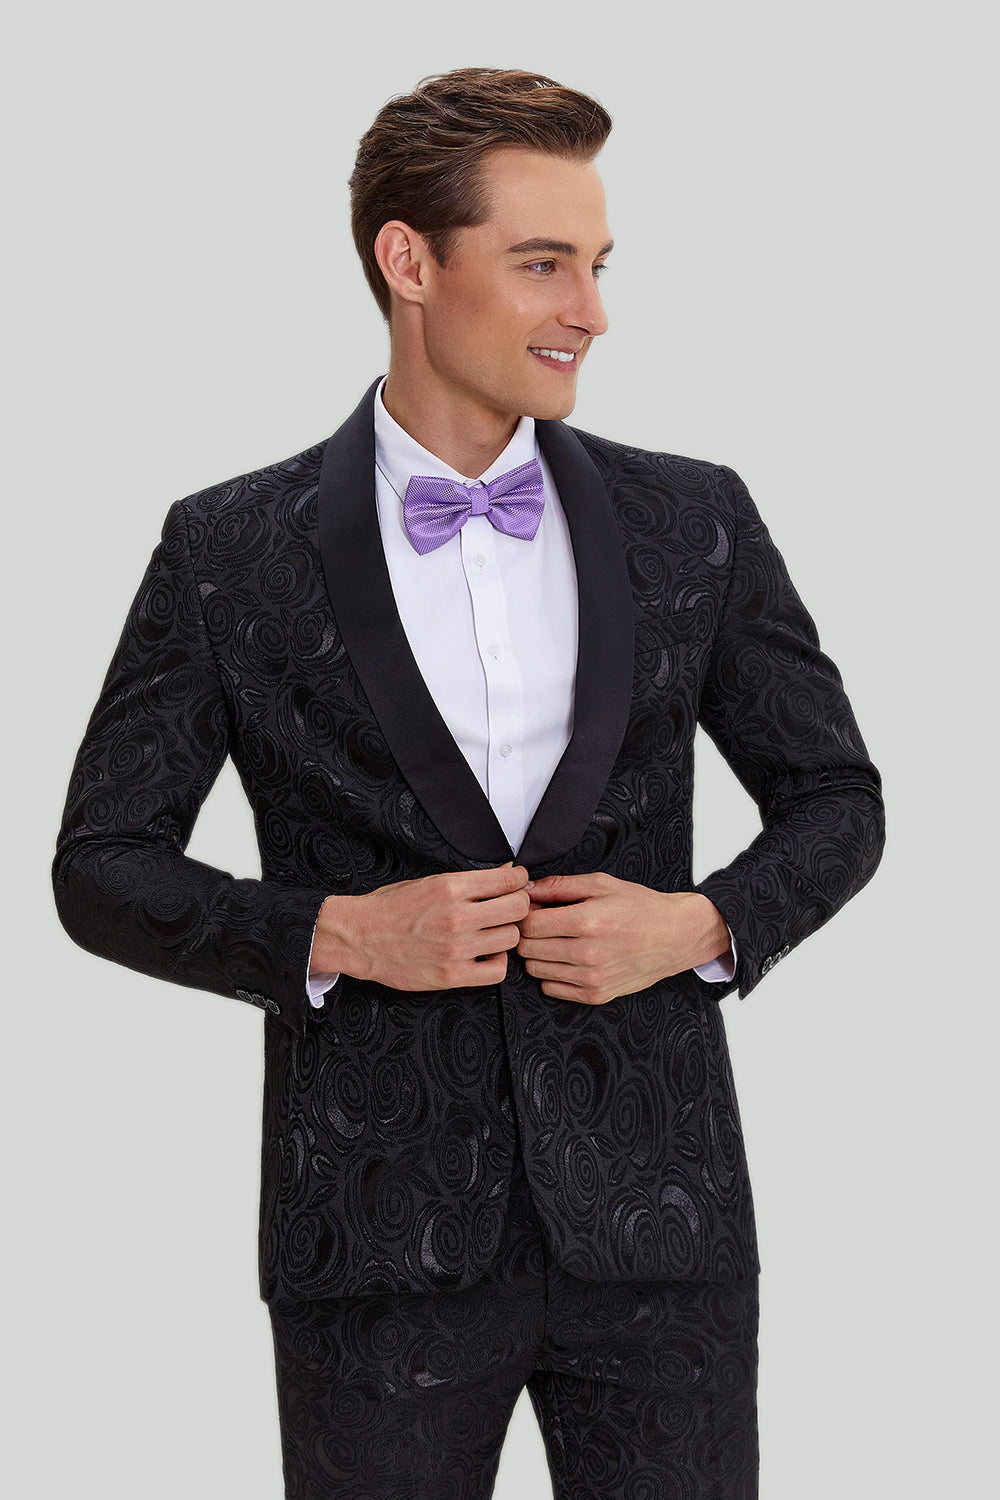 ZAPAKA Men's Homecoming Suits Black 2-piece Jacquard Prom Suits